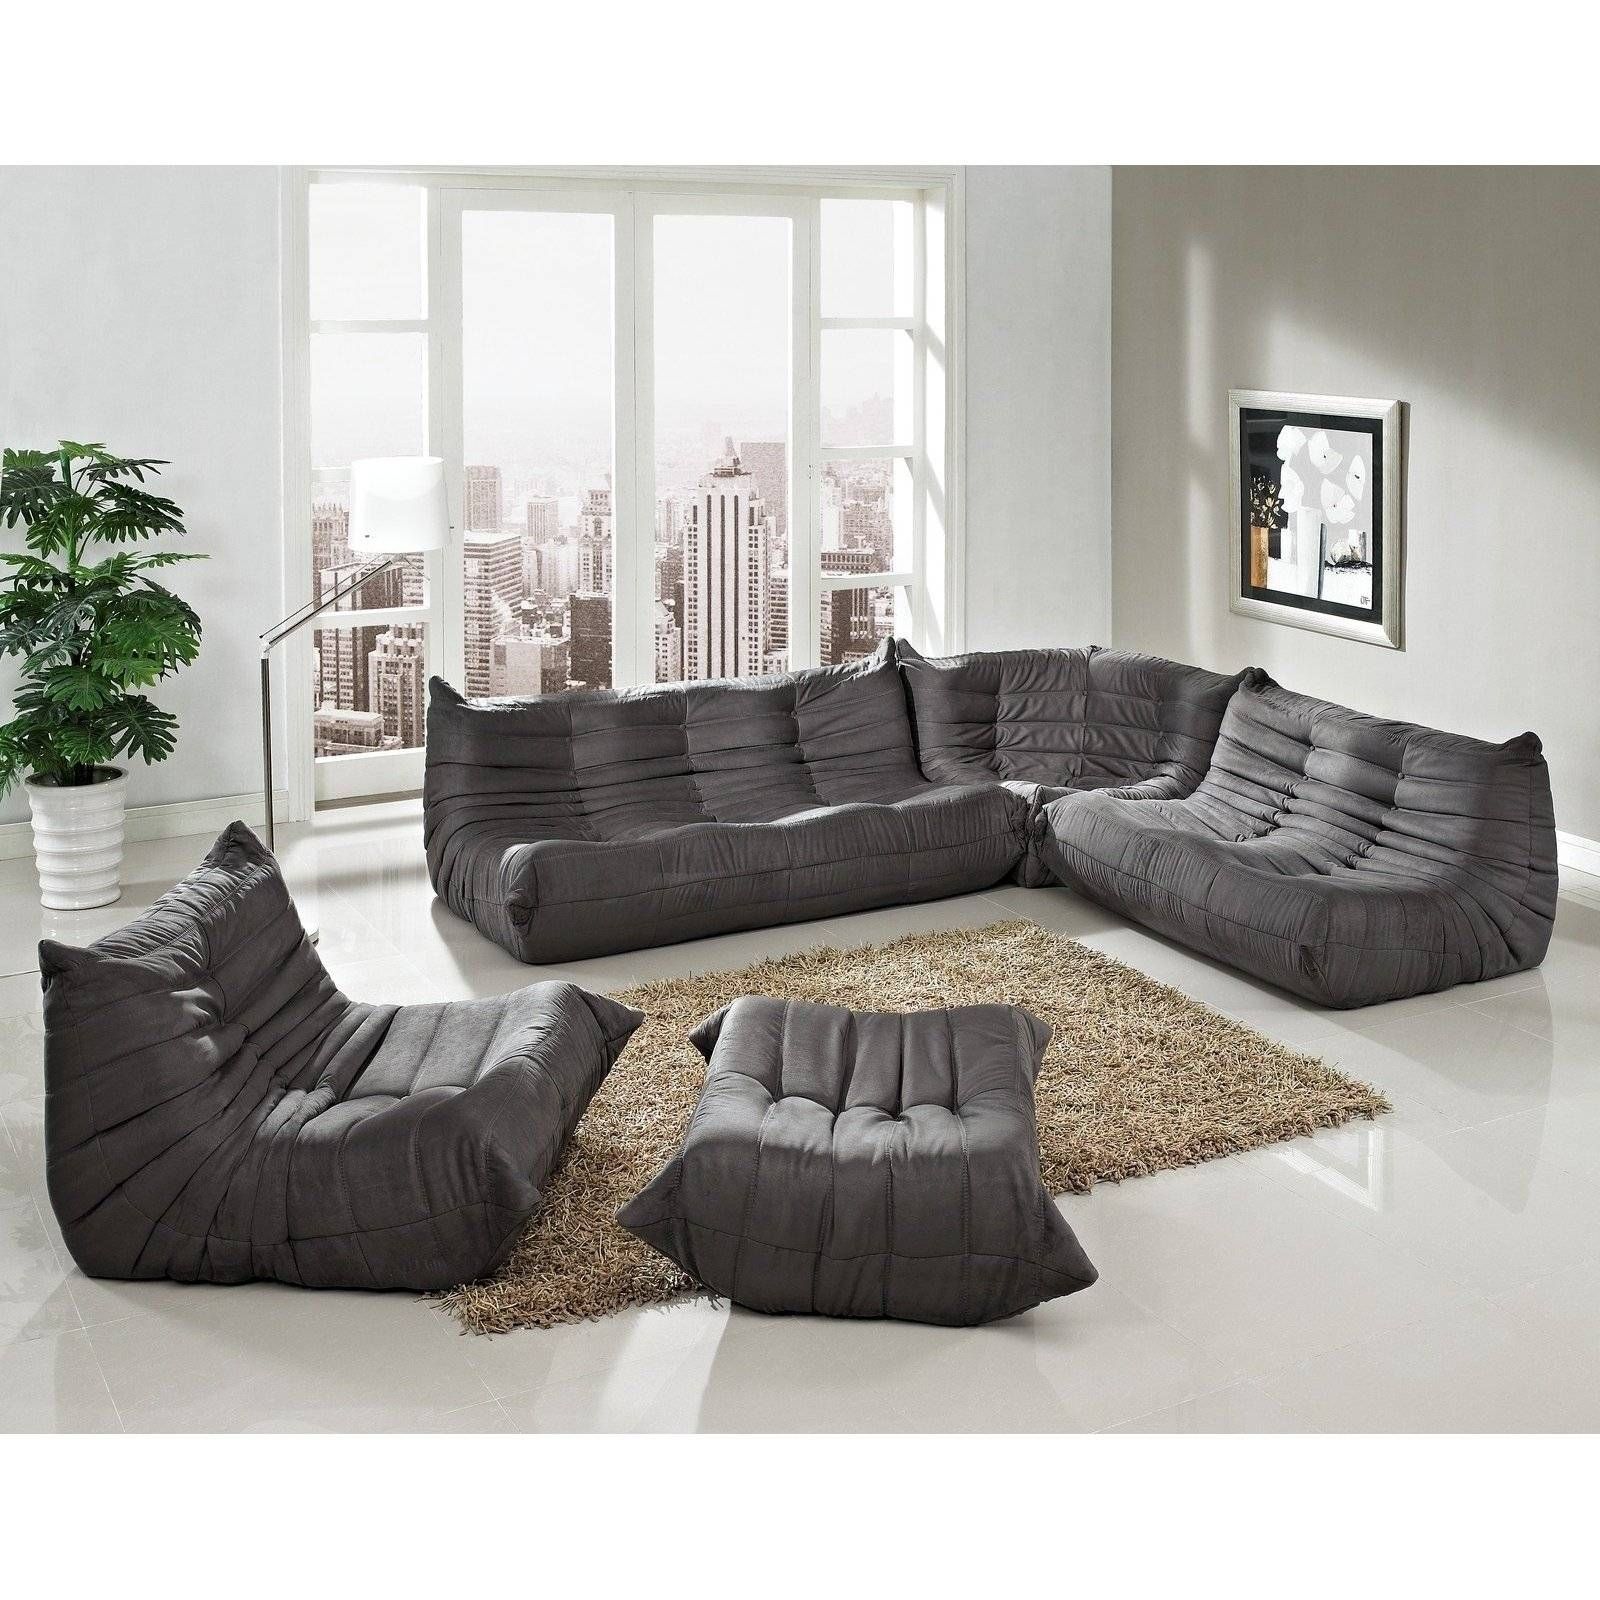 30 Best Collection of Leather Modular Sectional Sofas